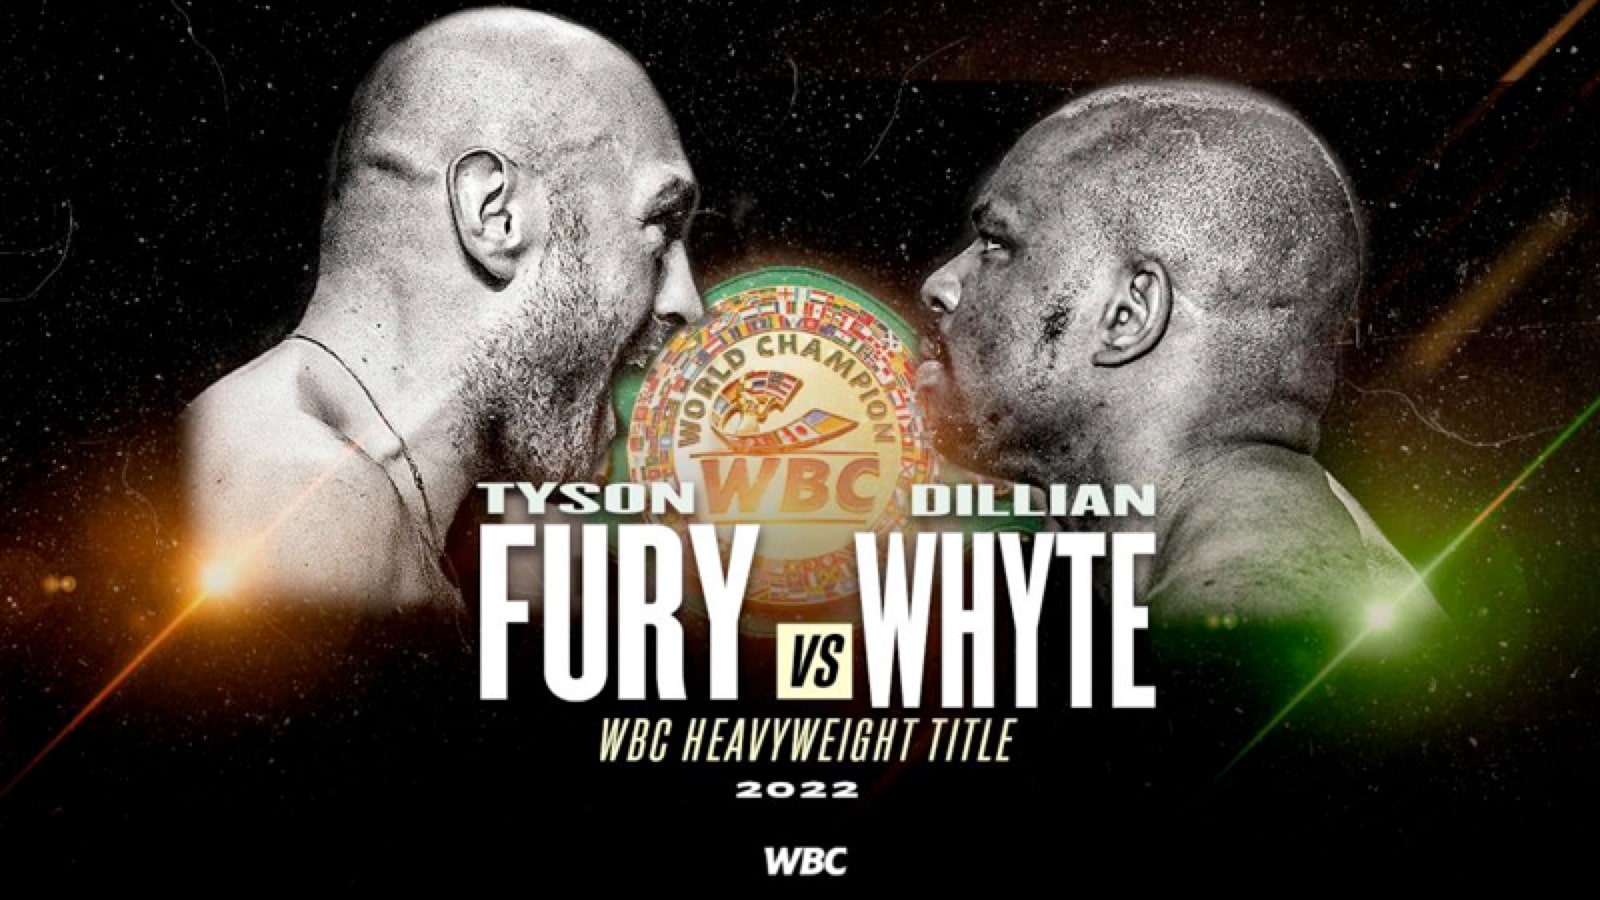 Tyson Fury says Dillian Whyte is SCARED now